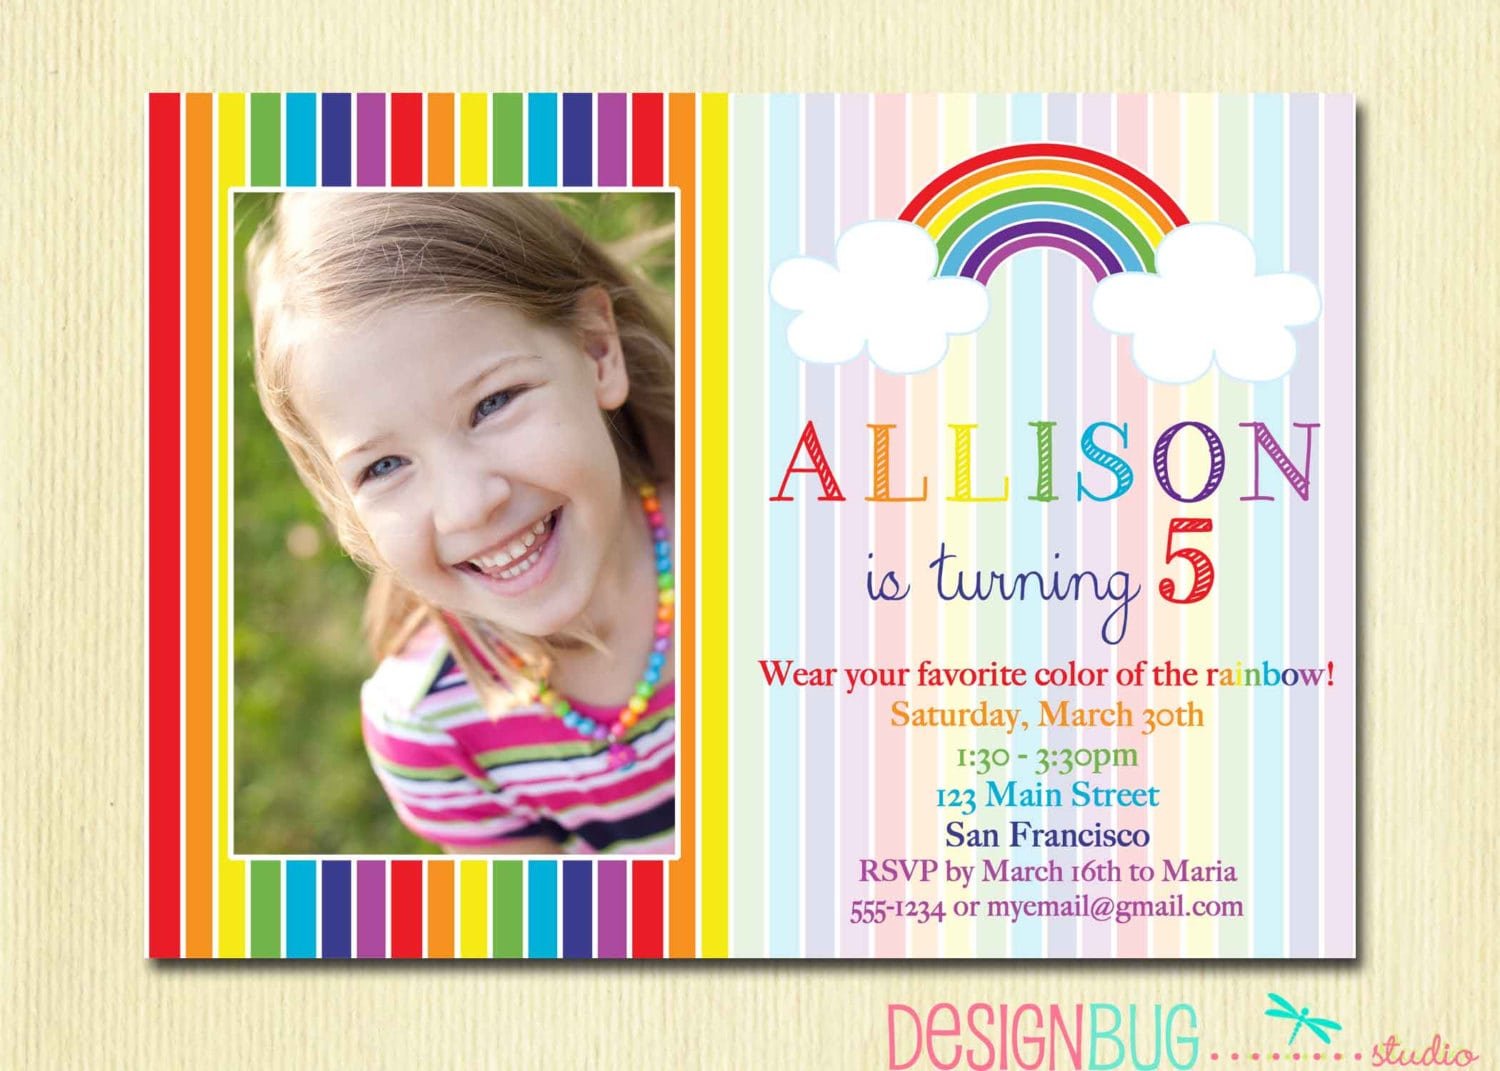 Birthday Party Invitation Wording For 7 Year Old